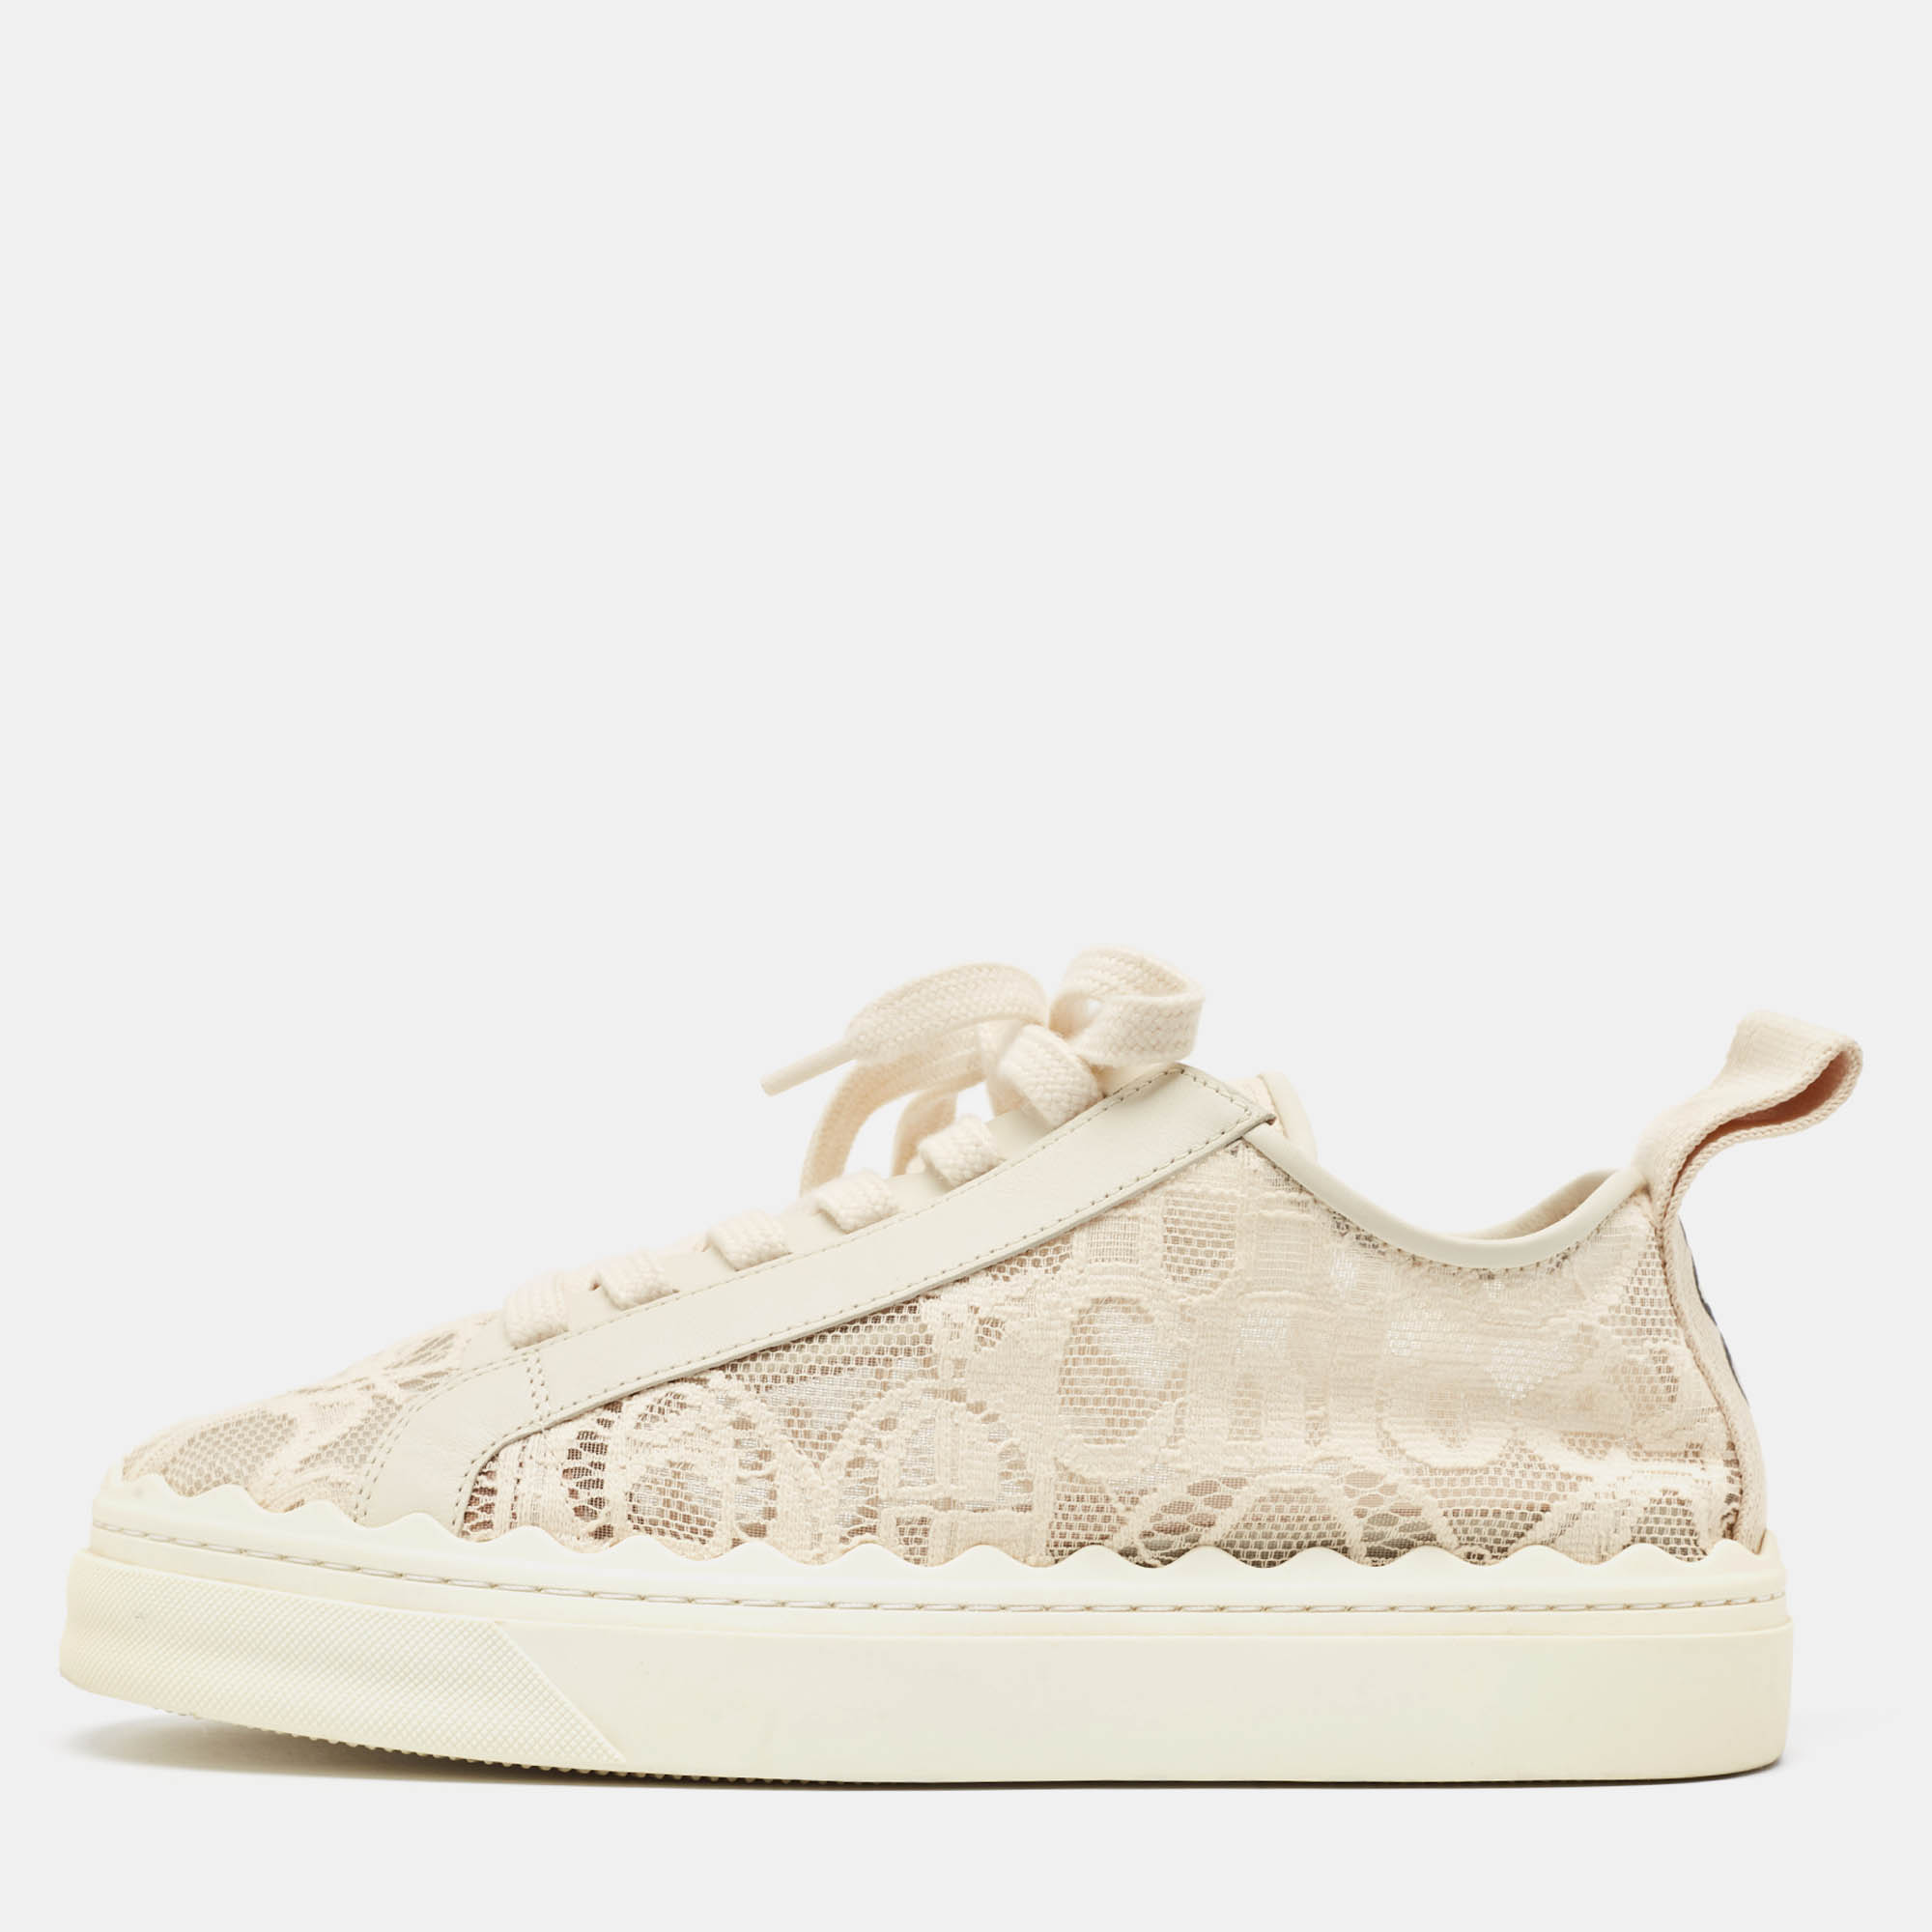 Chloe light beige lace and leather lauren sneakers size 39